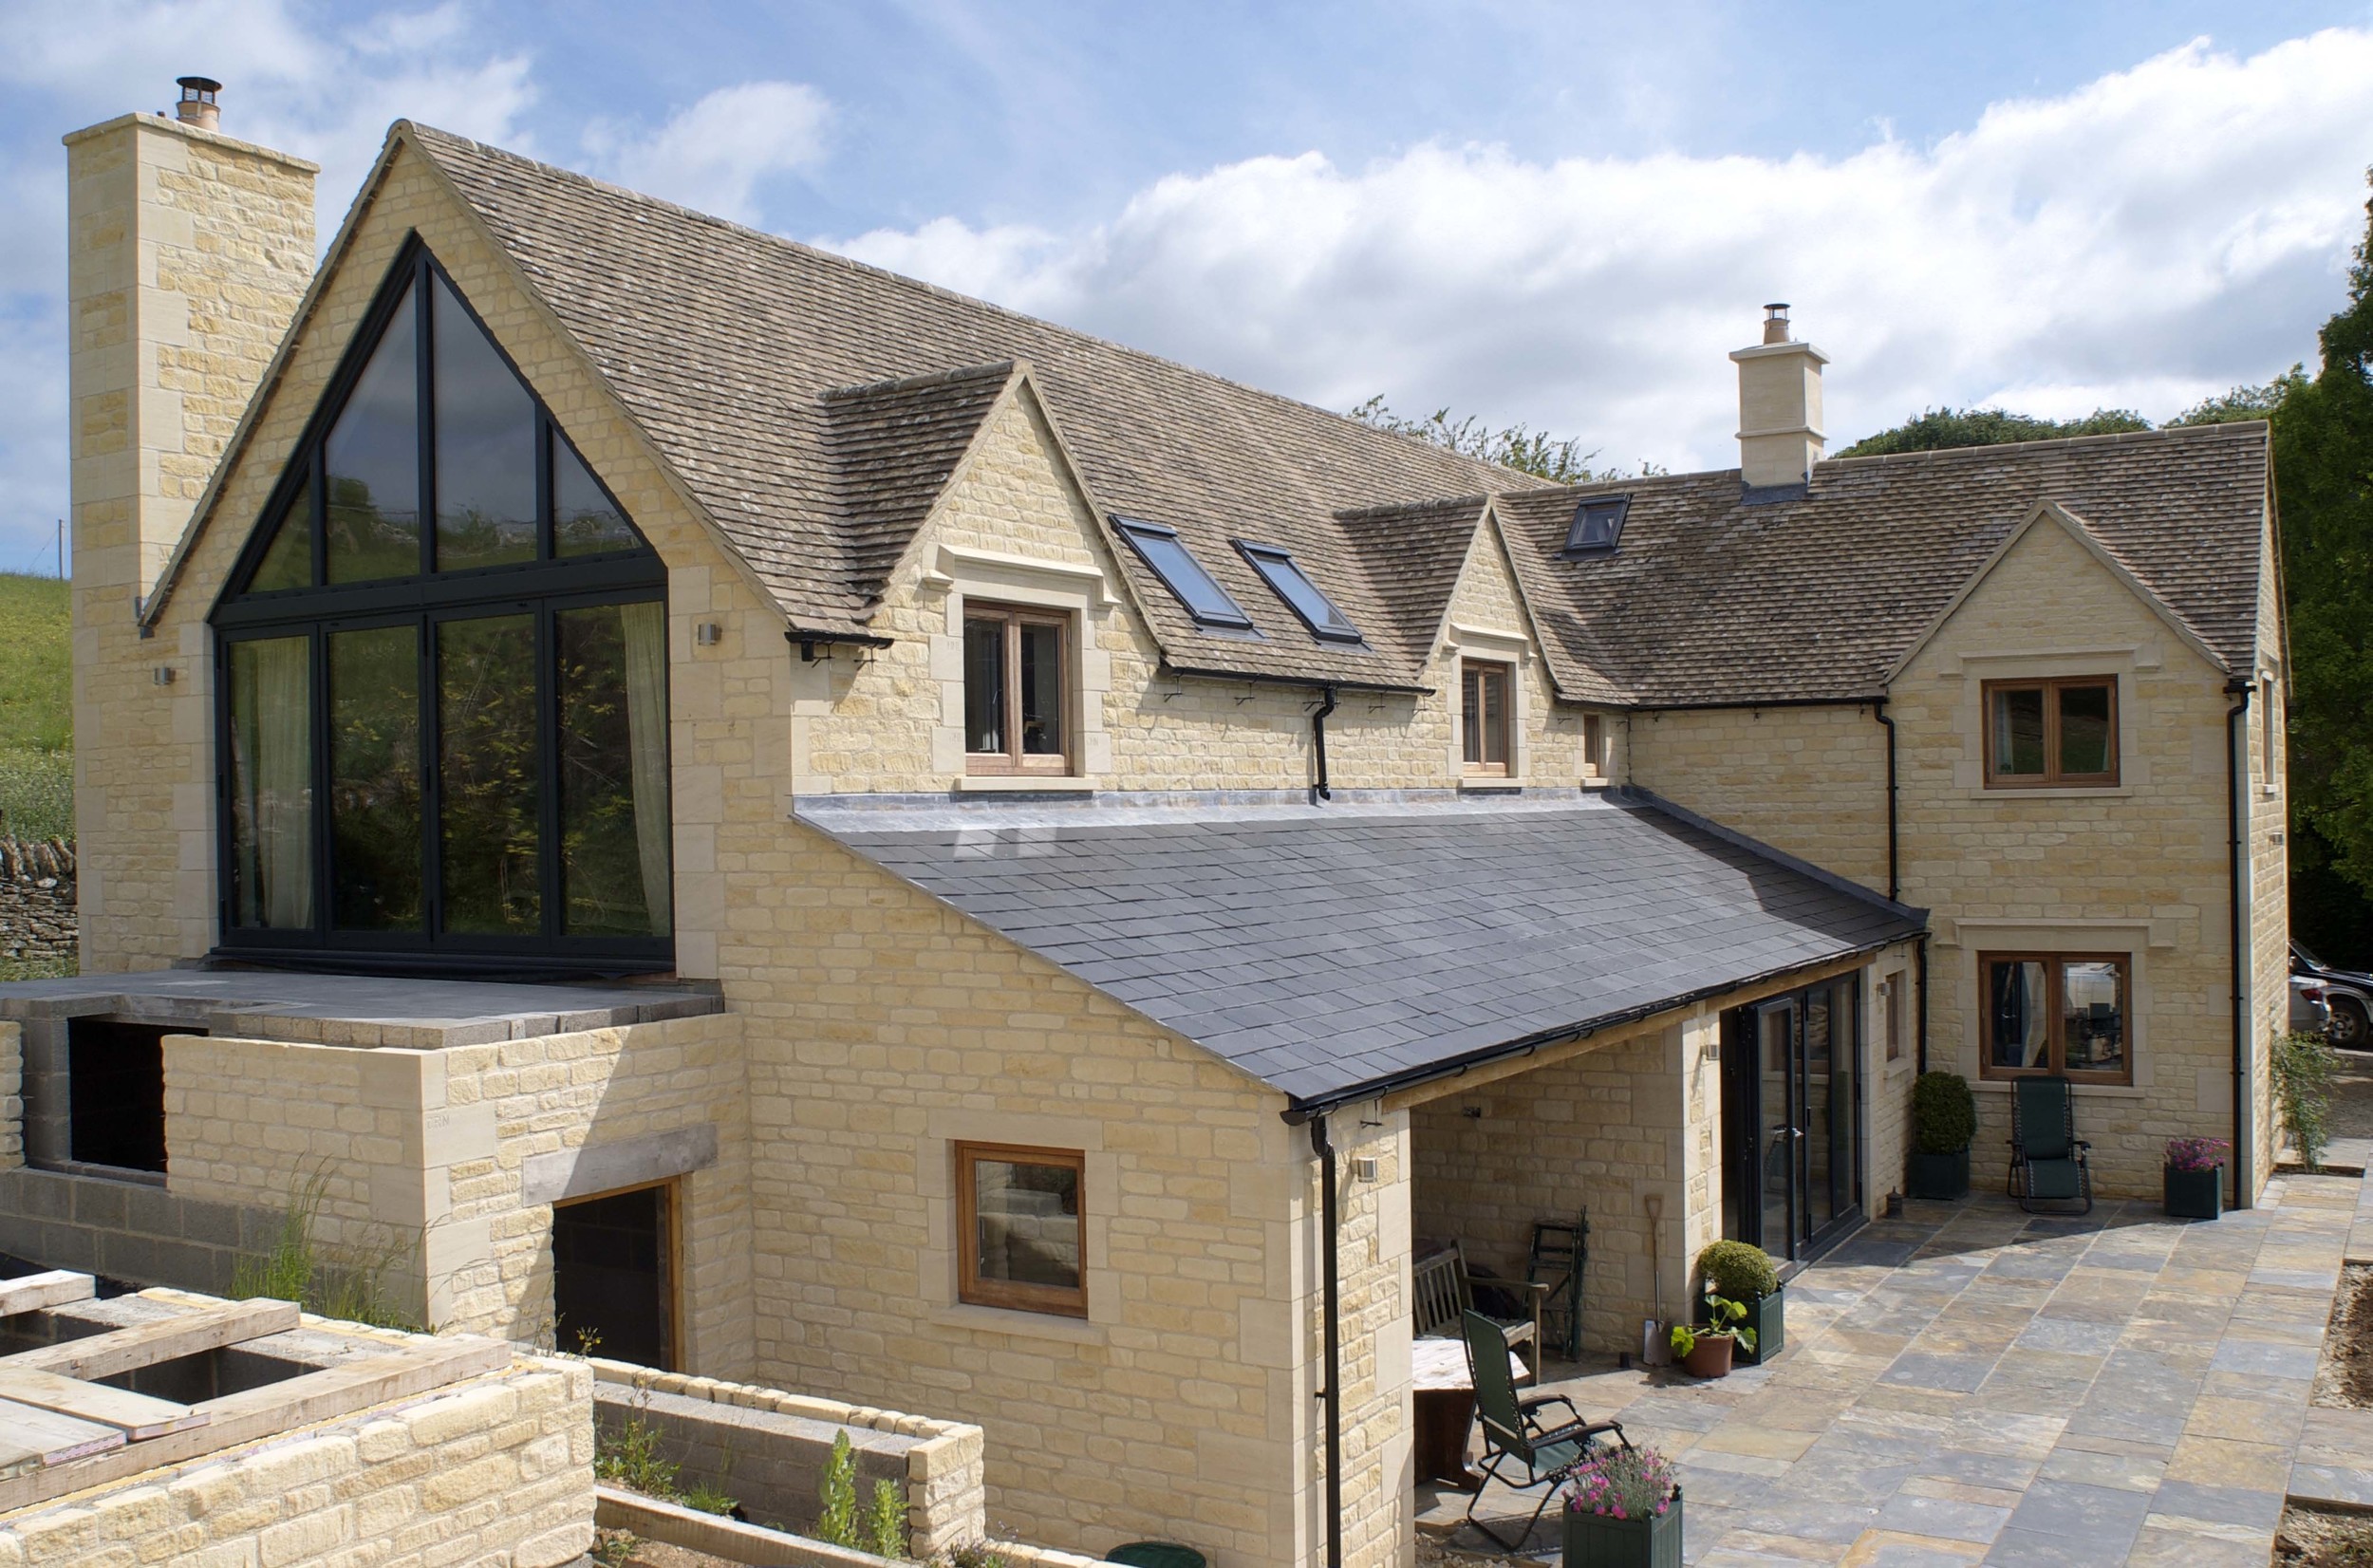  SIP constructed 3,000sqft stone new build 